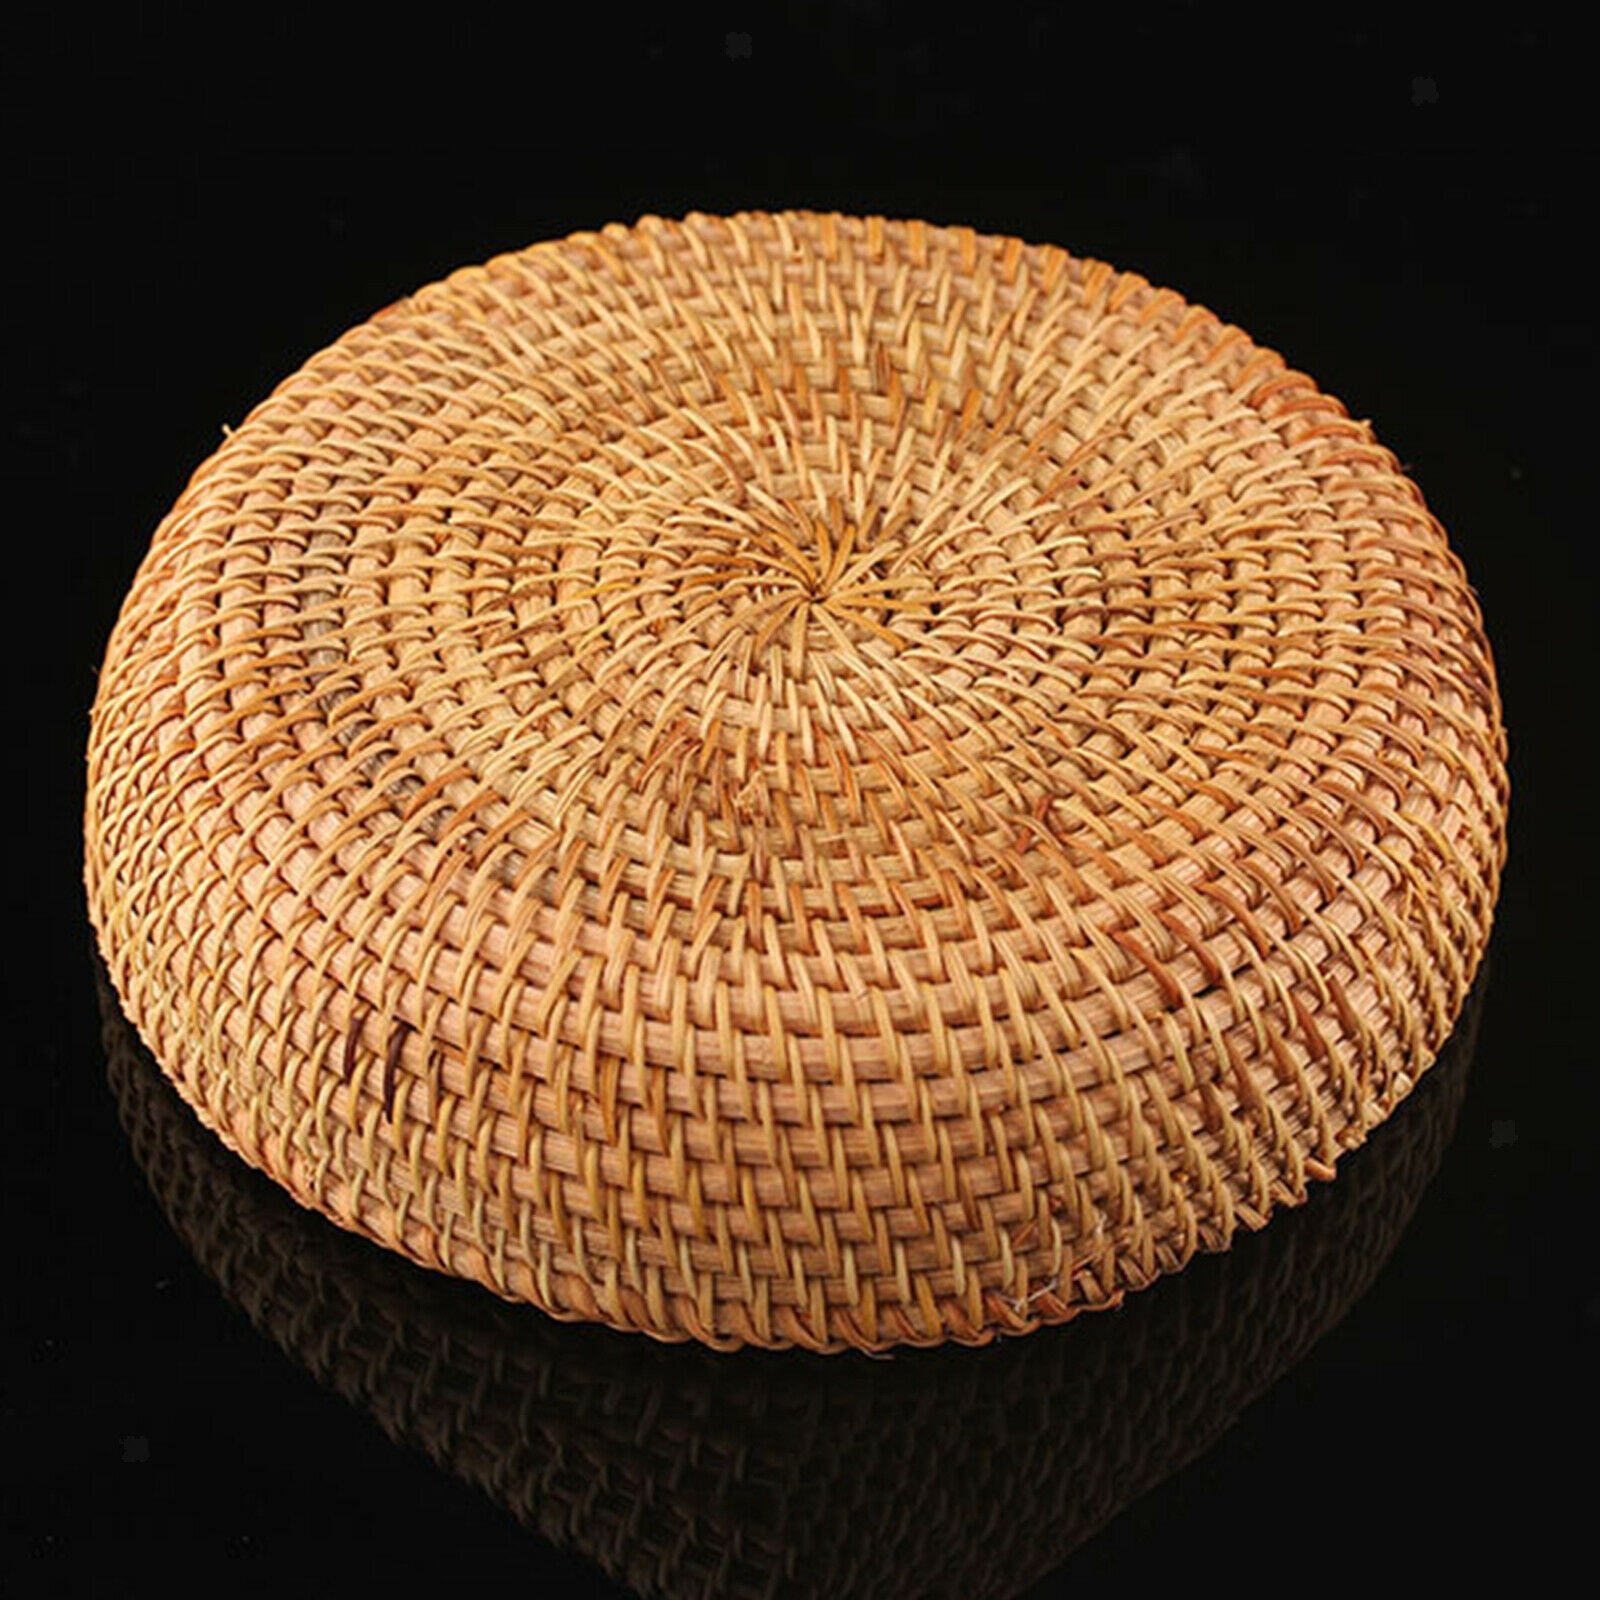 Round Wicker Woven Storage Basket for Home, Shops or Markets Container